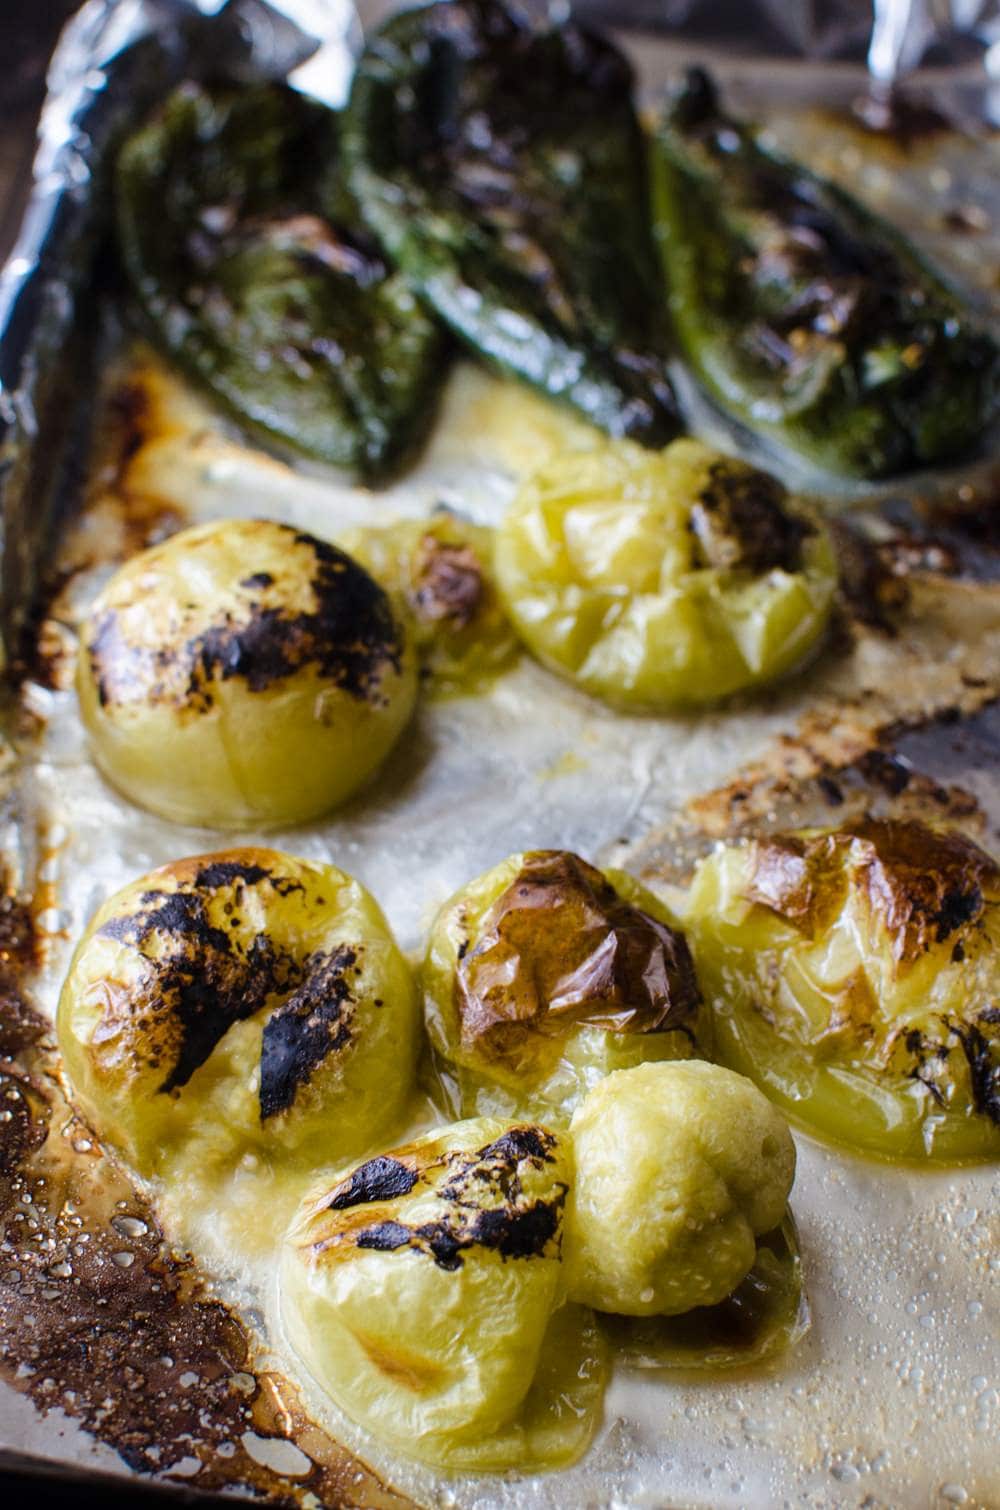 Tomatillos and poblano peppers that have been roasted and charred on a foil lined baking tray